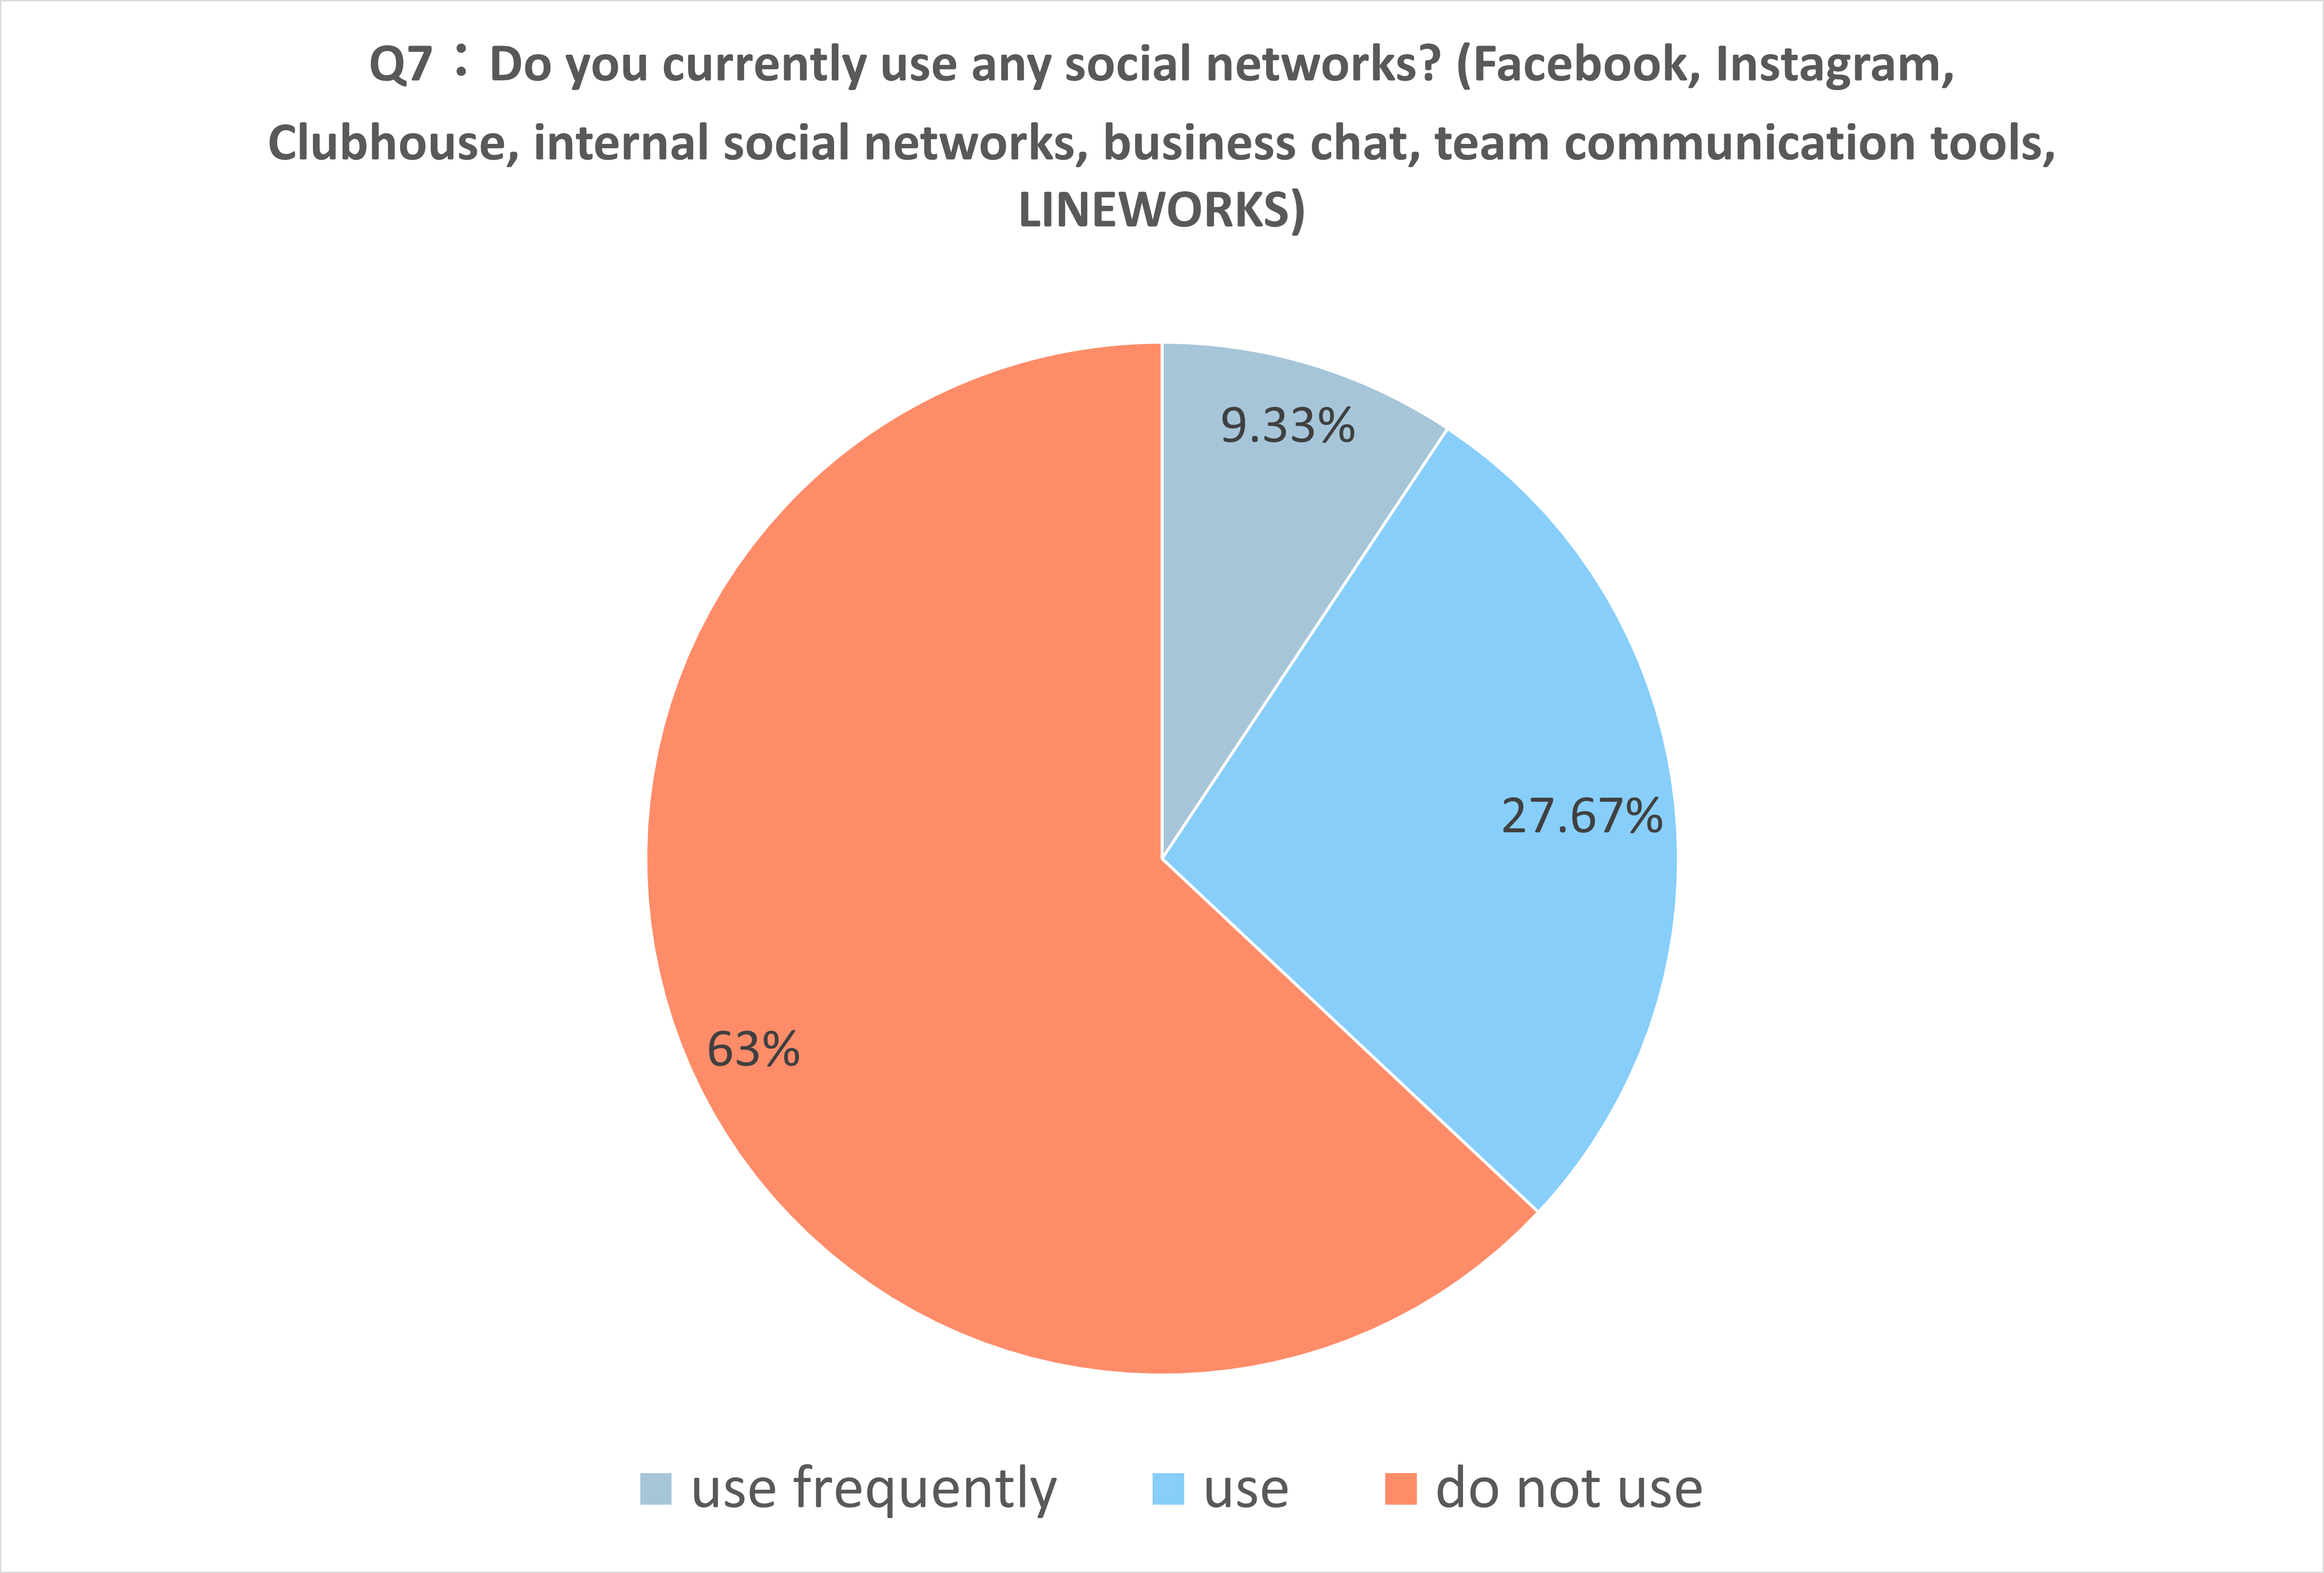 Do you currently use any social networks 